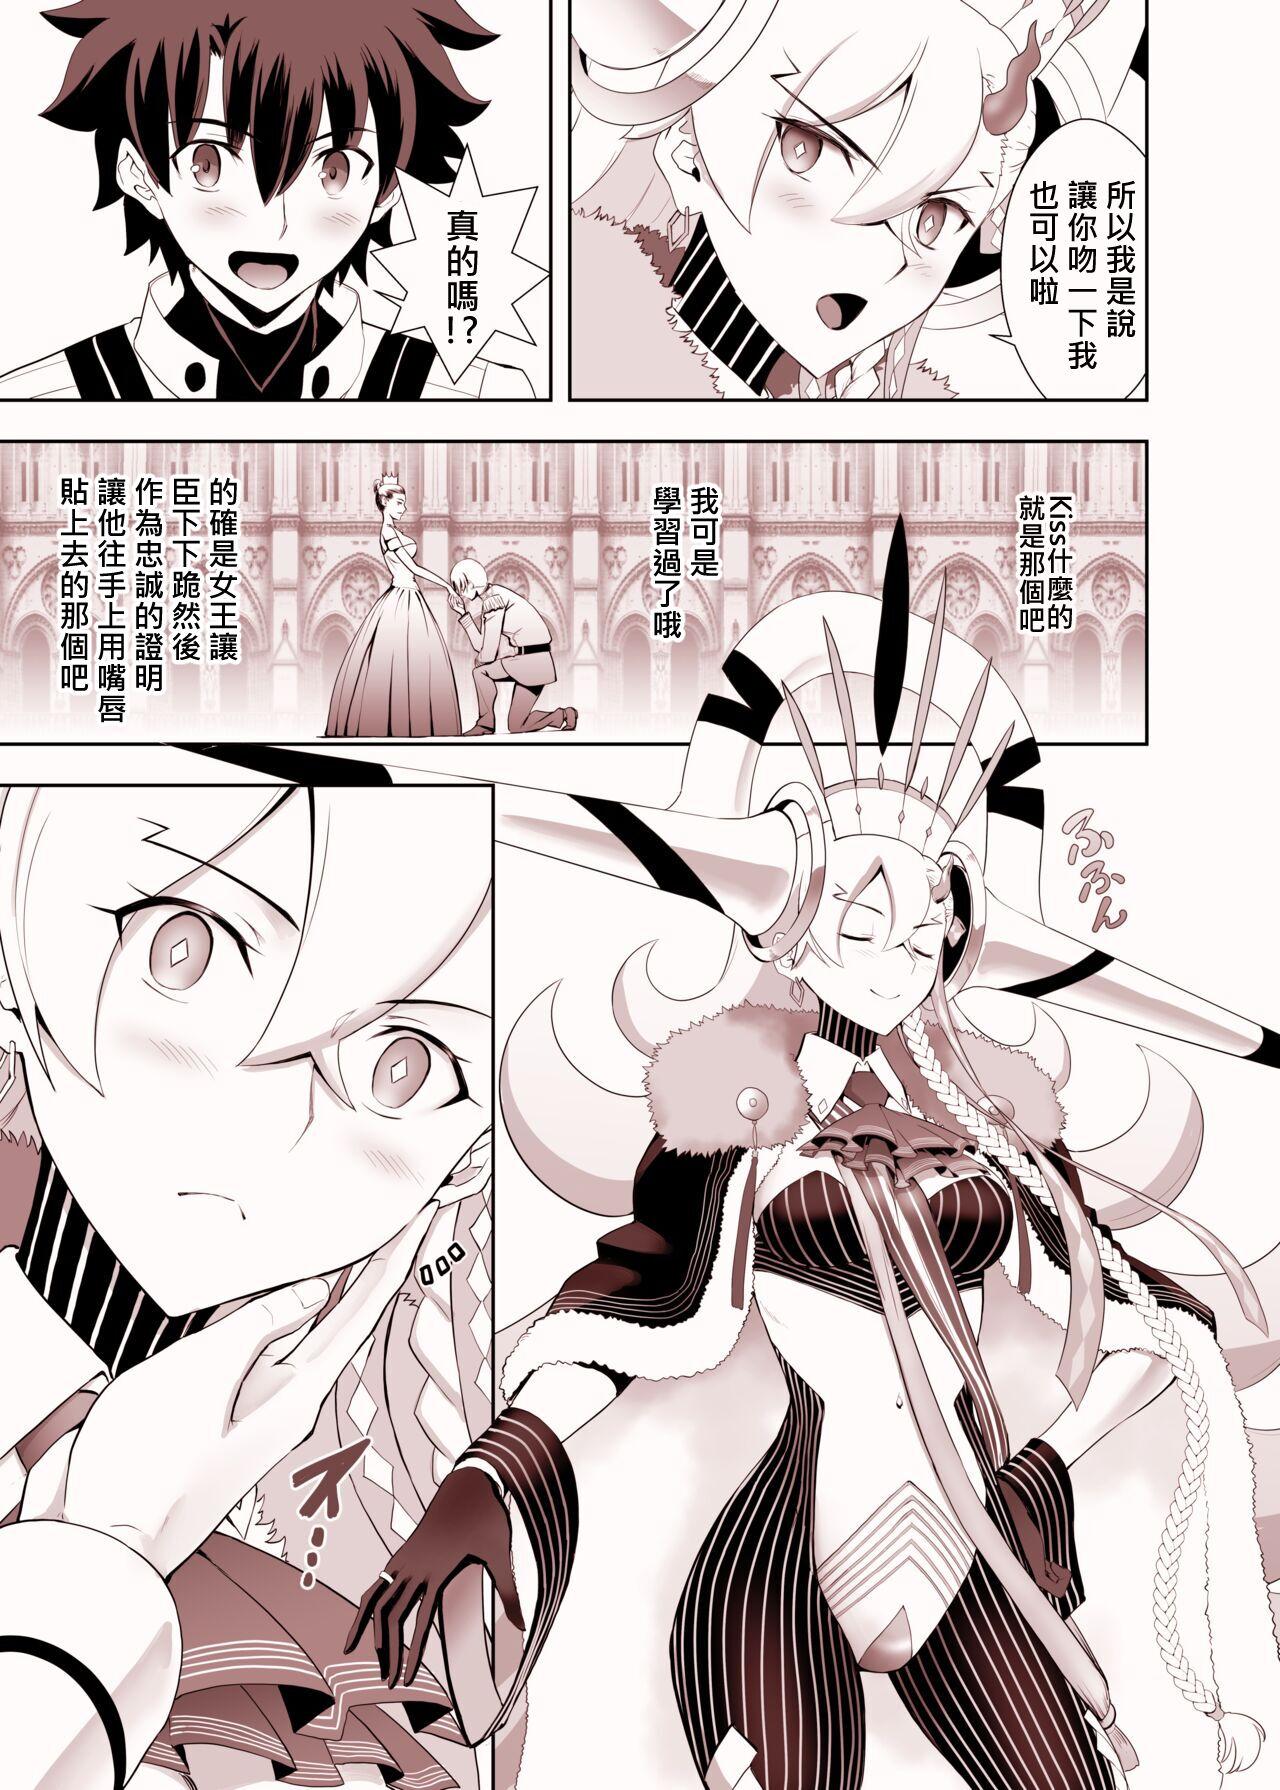 Porn Star Lovely U - Fate grand order Long - Page 4